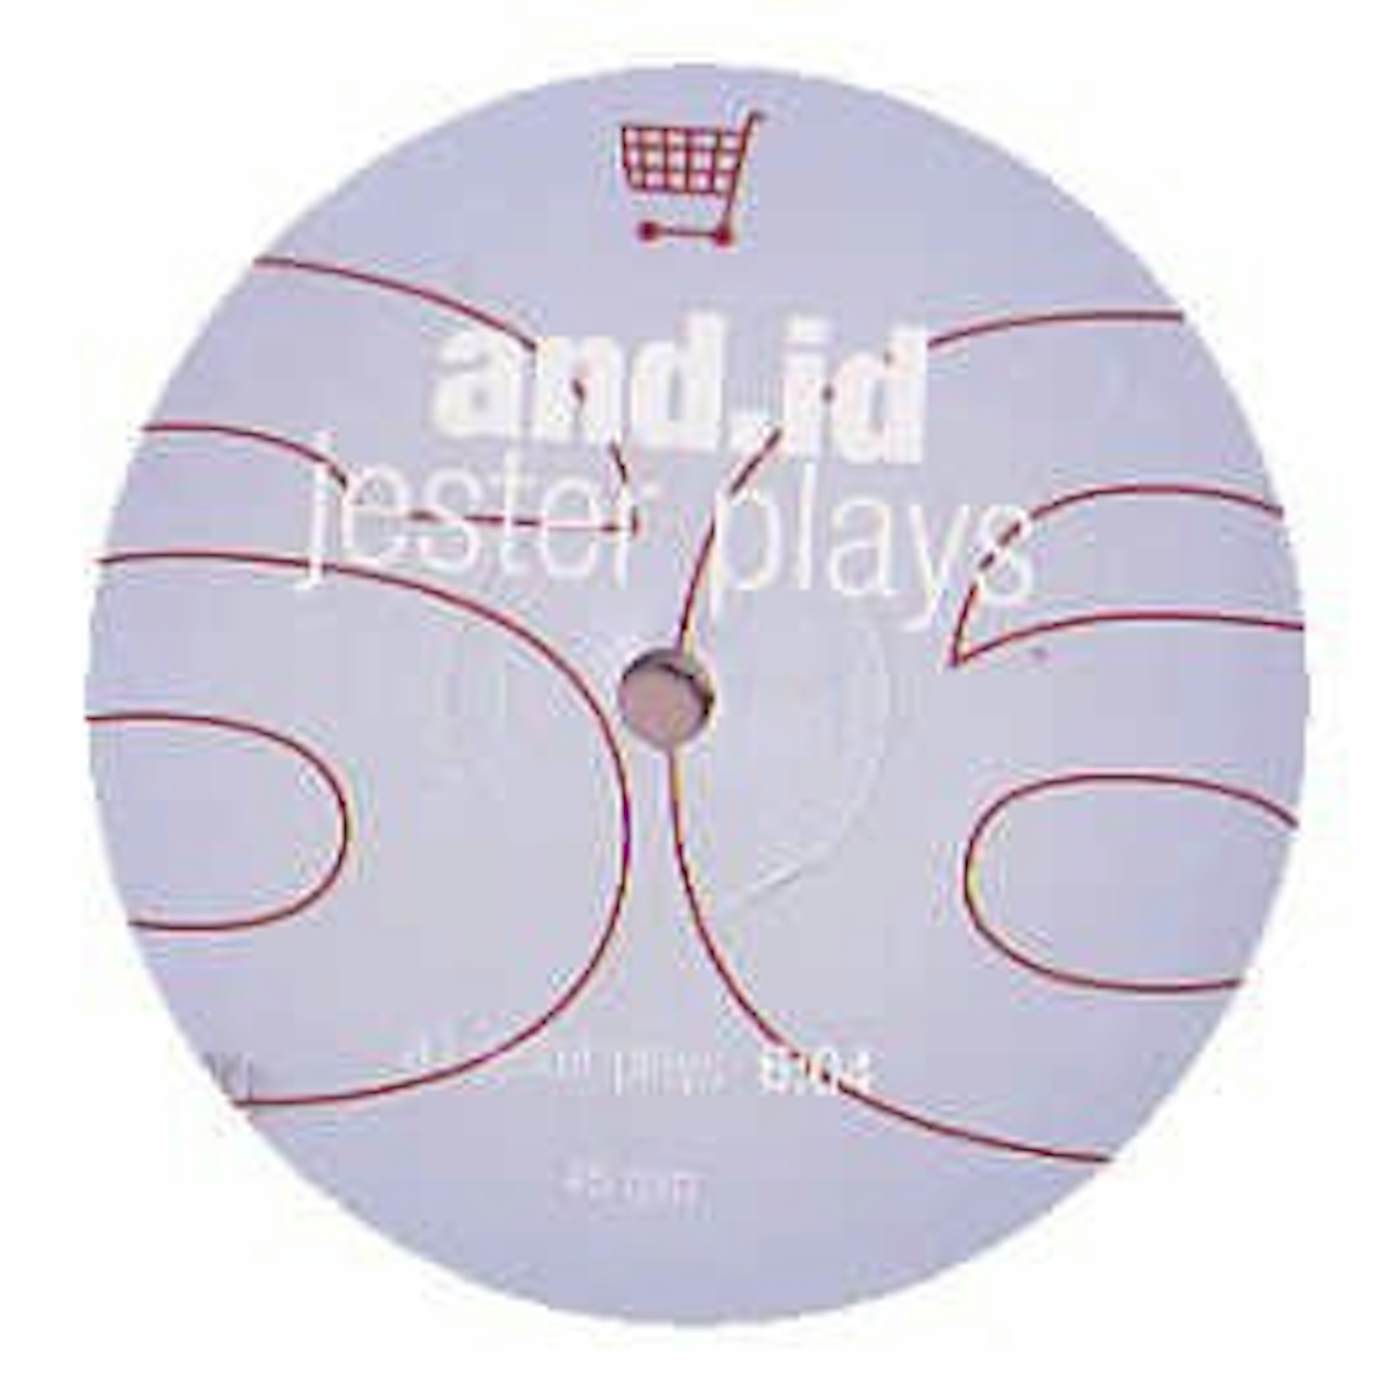 AND.ID JESTER PLAYS Vinyl Record